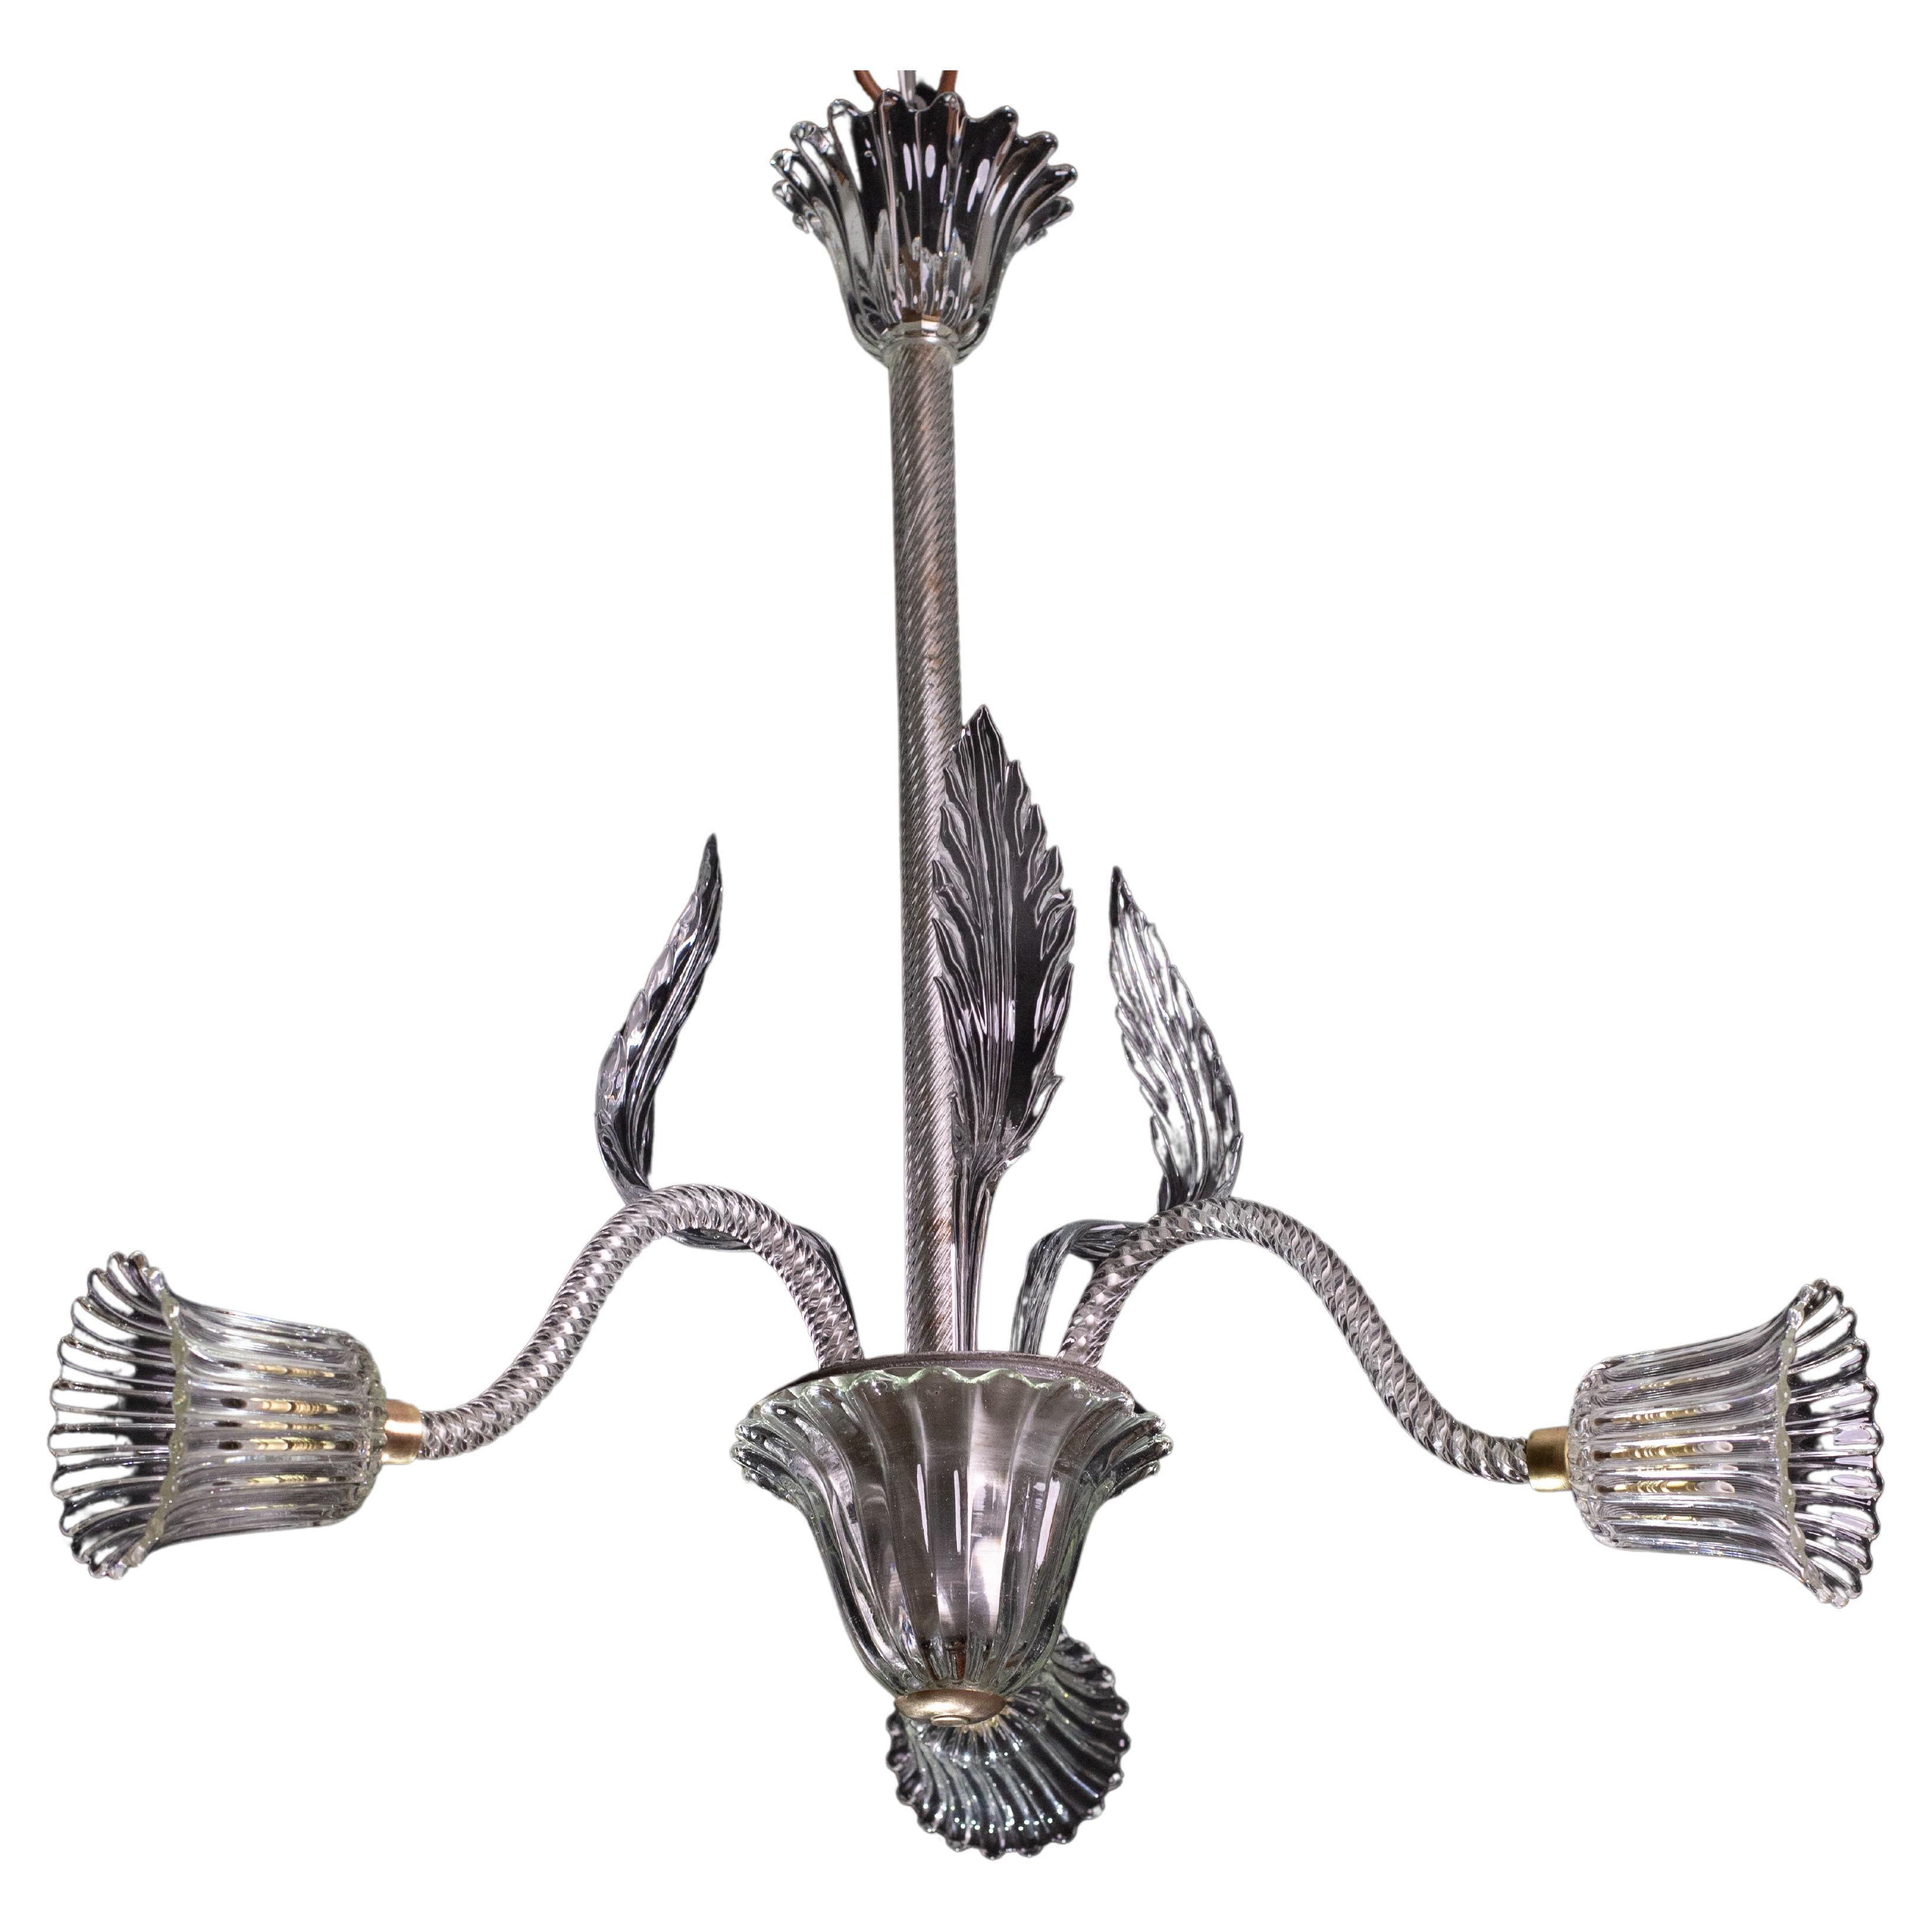 Art Deco Chandelier by Ercole Barovier Murano 1940s For Sale